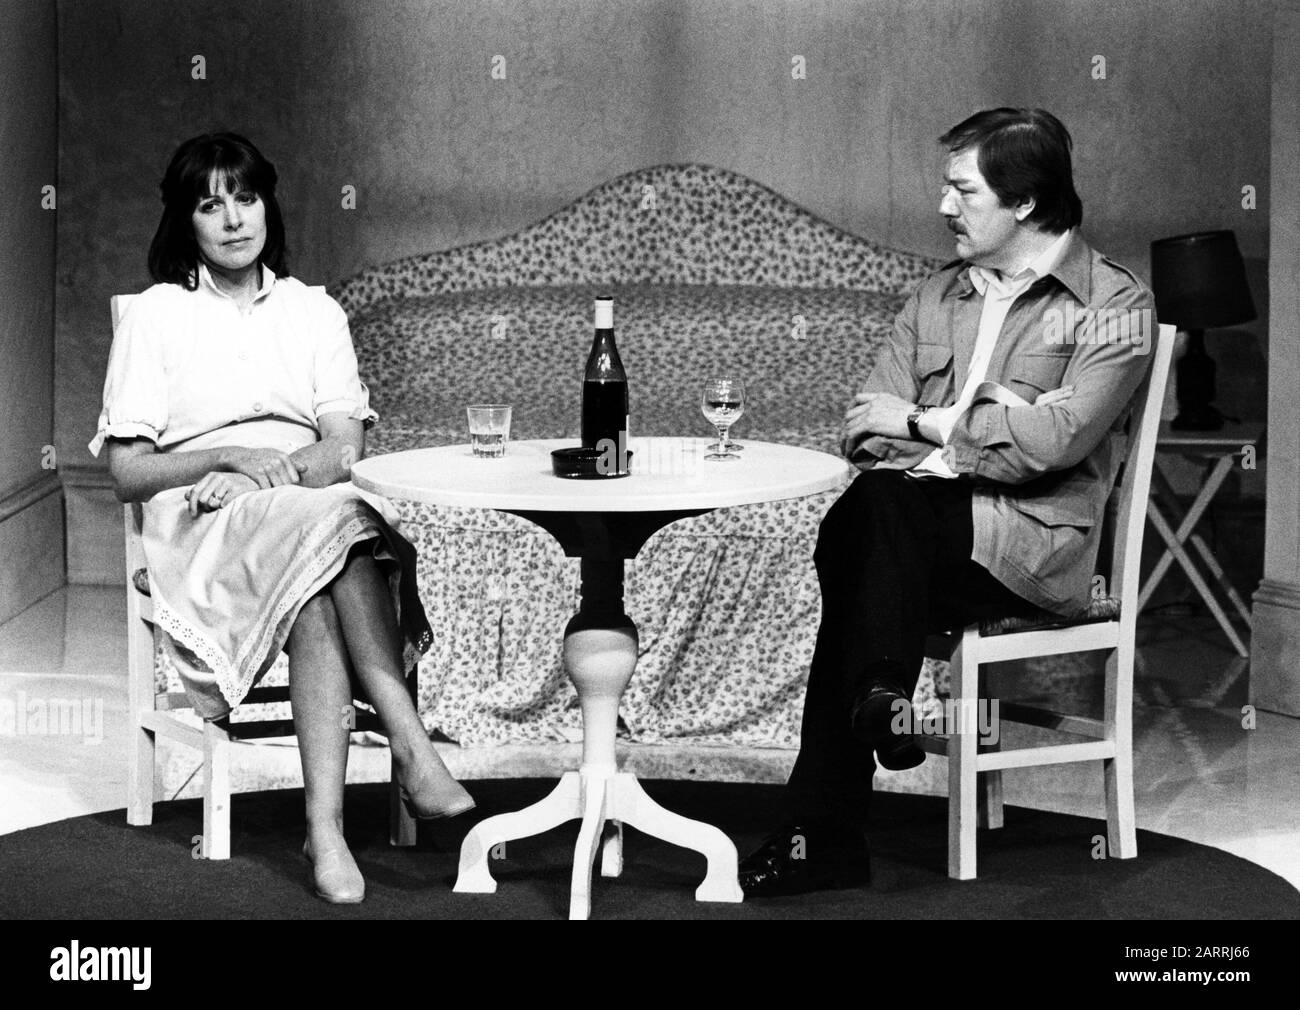 Penelope Wilton as Emma and Michael Gambon as Jerry in BETRAYAL by Harold Pinter directed by Peter Hall at the National Theatre (NT), London in 1978 . Sir Michael Gambon, born in Dublin 1940, moved to London at the age of 6, became a British citizen. Knighted in 1998. Multi-award-winner, including 3 Oliviers and 4 BAFTAs. Dame Penelope Wilton, born in Scarborough 1946. English stage, television and film actress. Awarded OBE in 2004 and DBE in 2016. Stock Photo